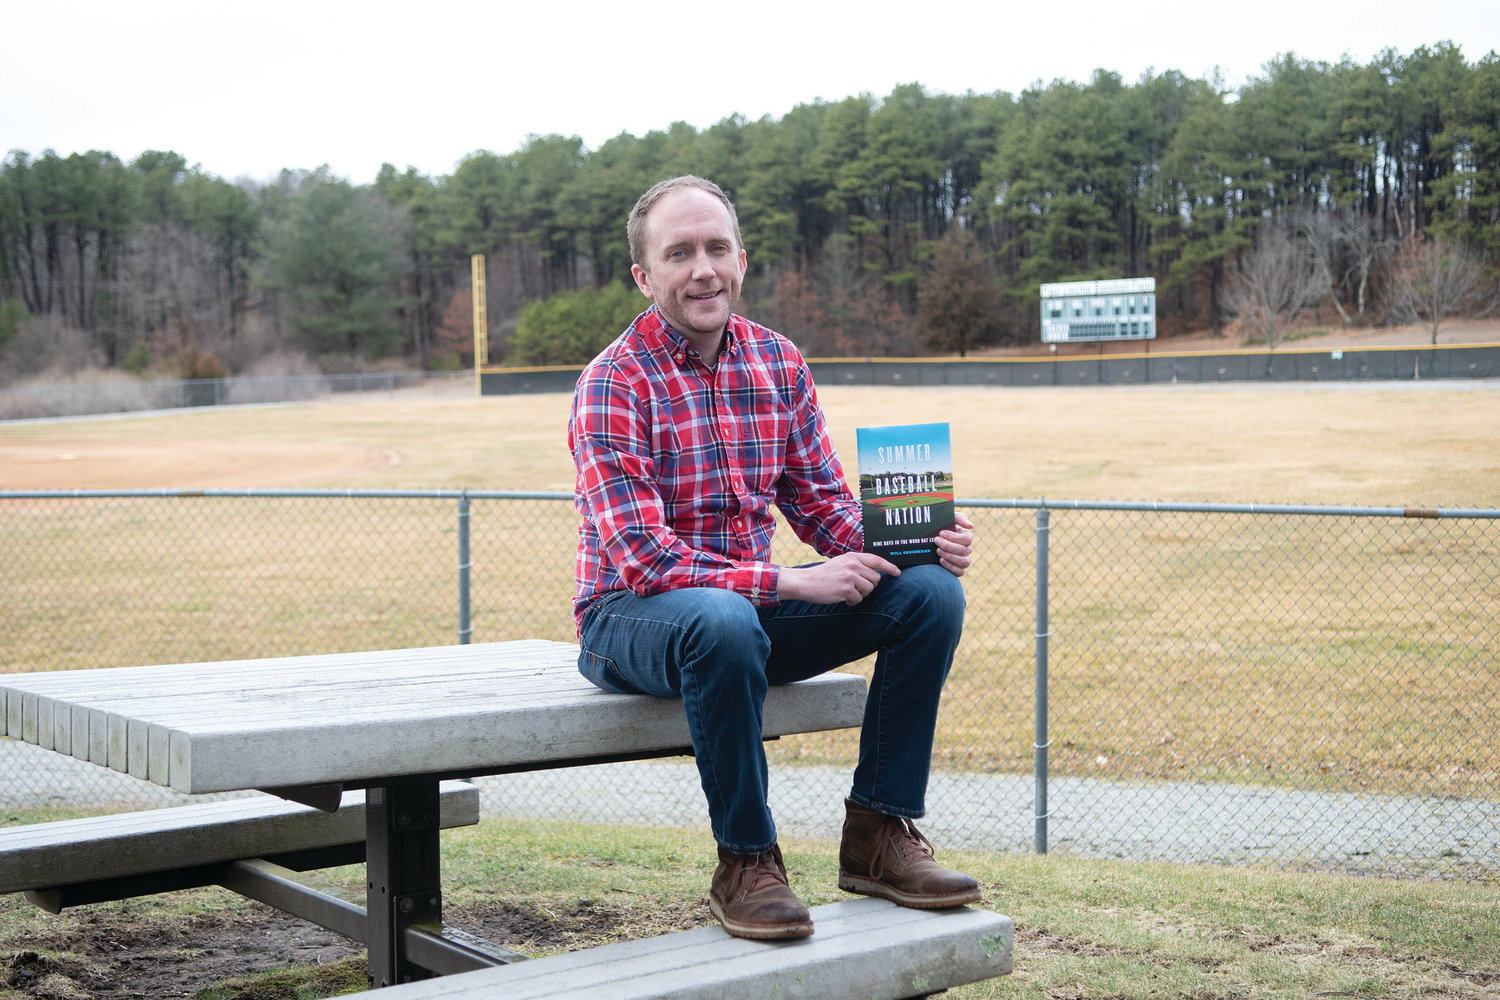 Passion Project: Author William Geoghegan poses with his new book “Summer Baseball Nation.”